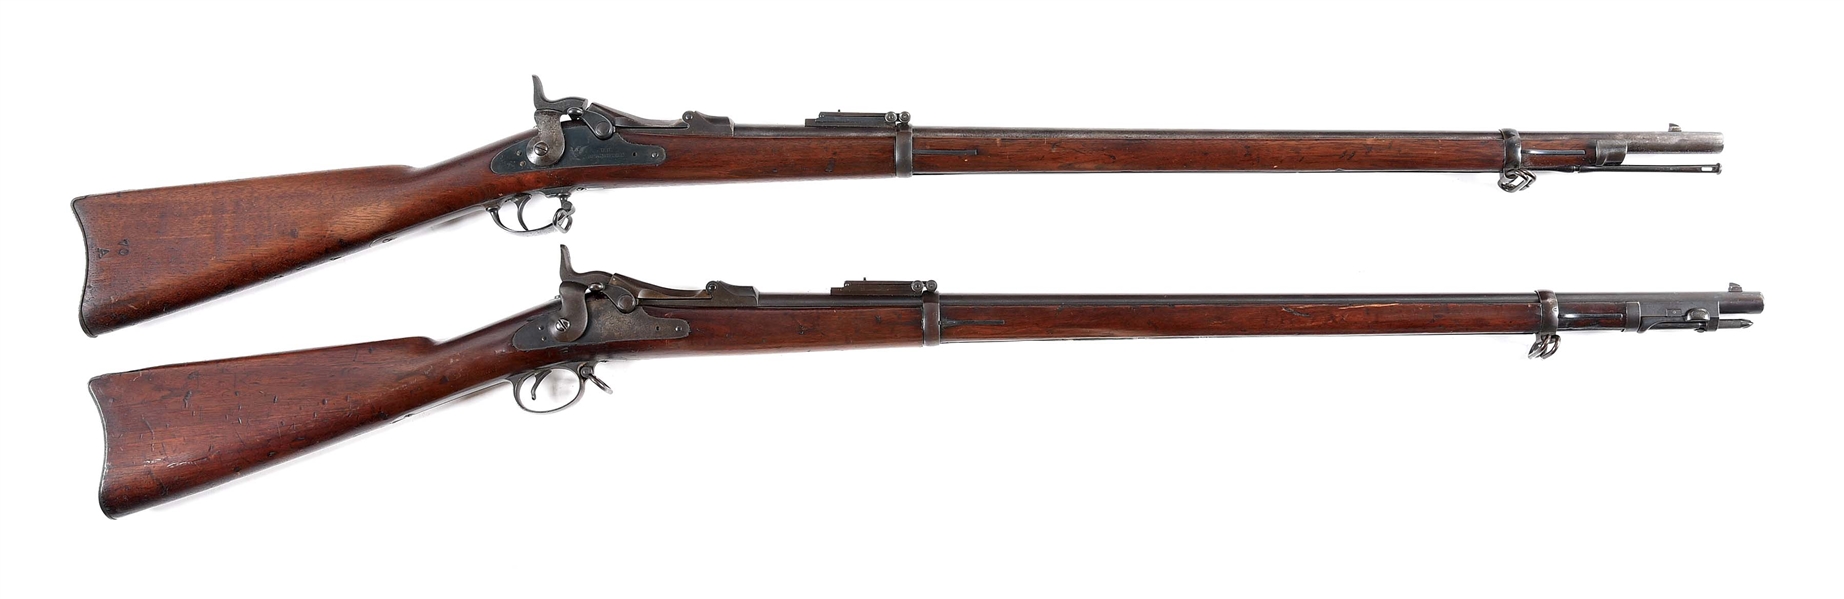 (A) LOT OF 2: SPRINGFIELD 1884 TRAPDOOR RIFLES.